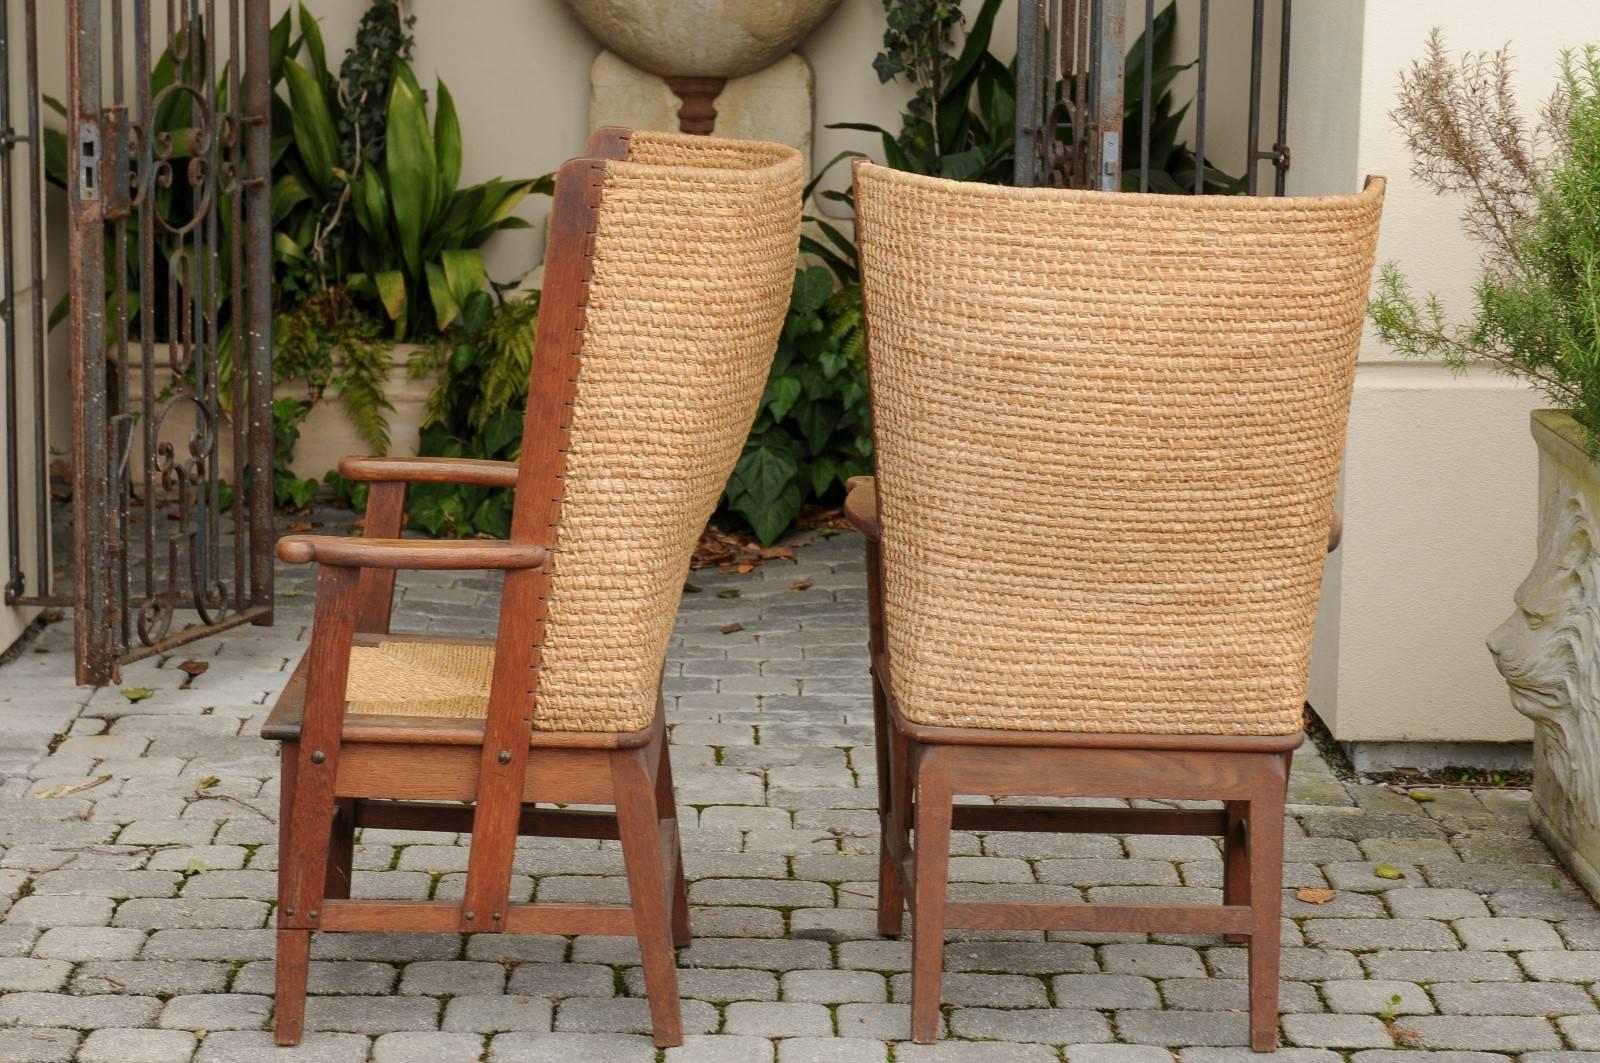 Pair of Scottish Mid-19th Century Oak Orkney Chairs with Handwoven Straw Backs 4